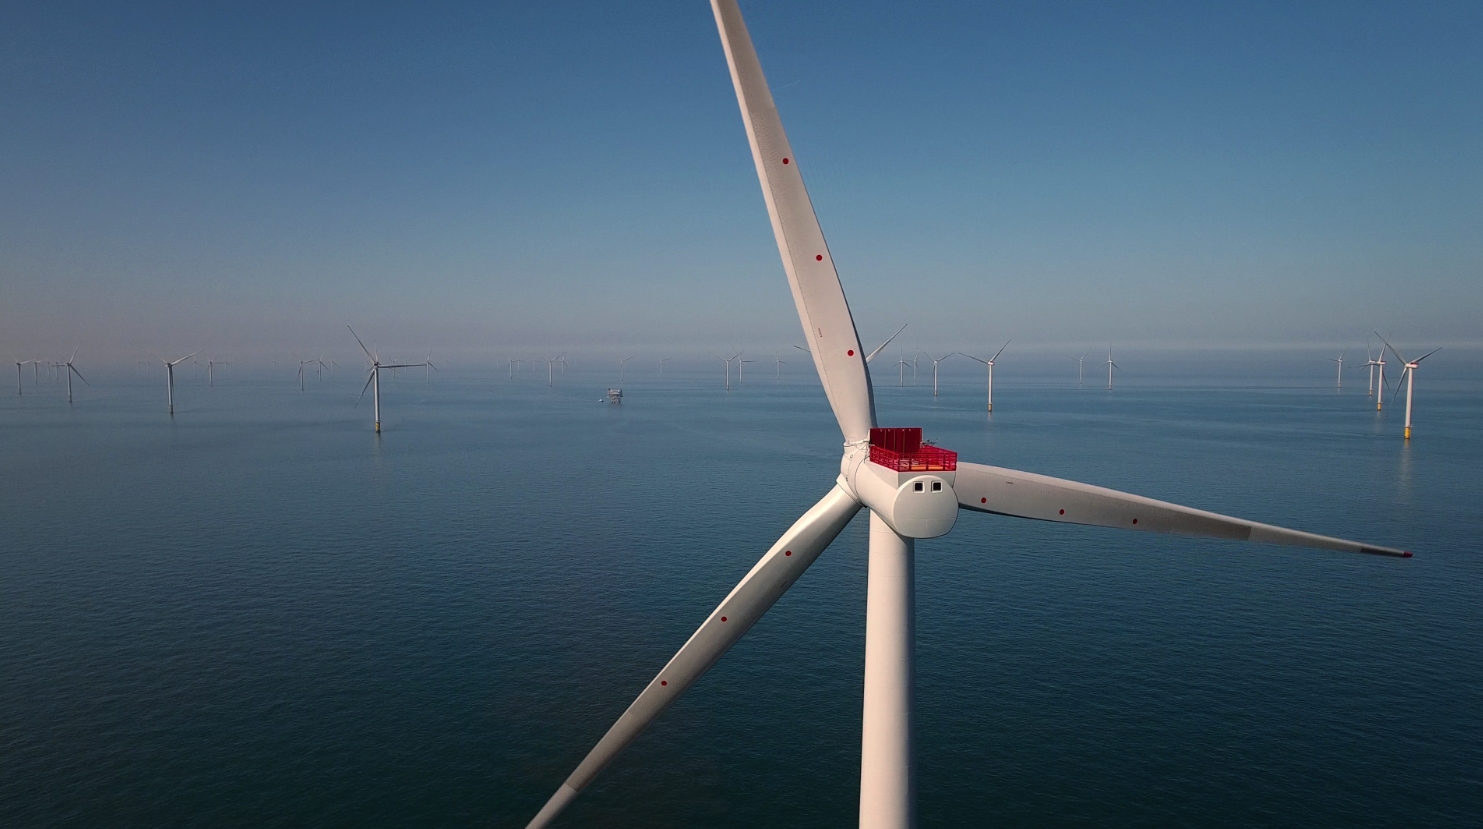 A photo of the Race Bank offshore wind farm with one wind turbine rotor close up